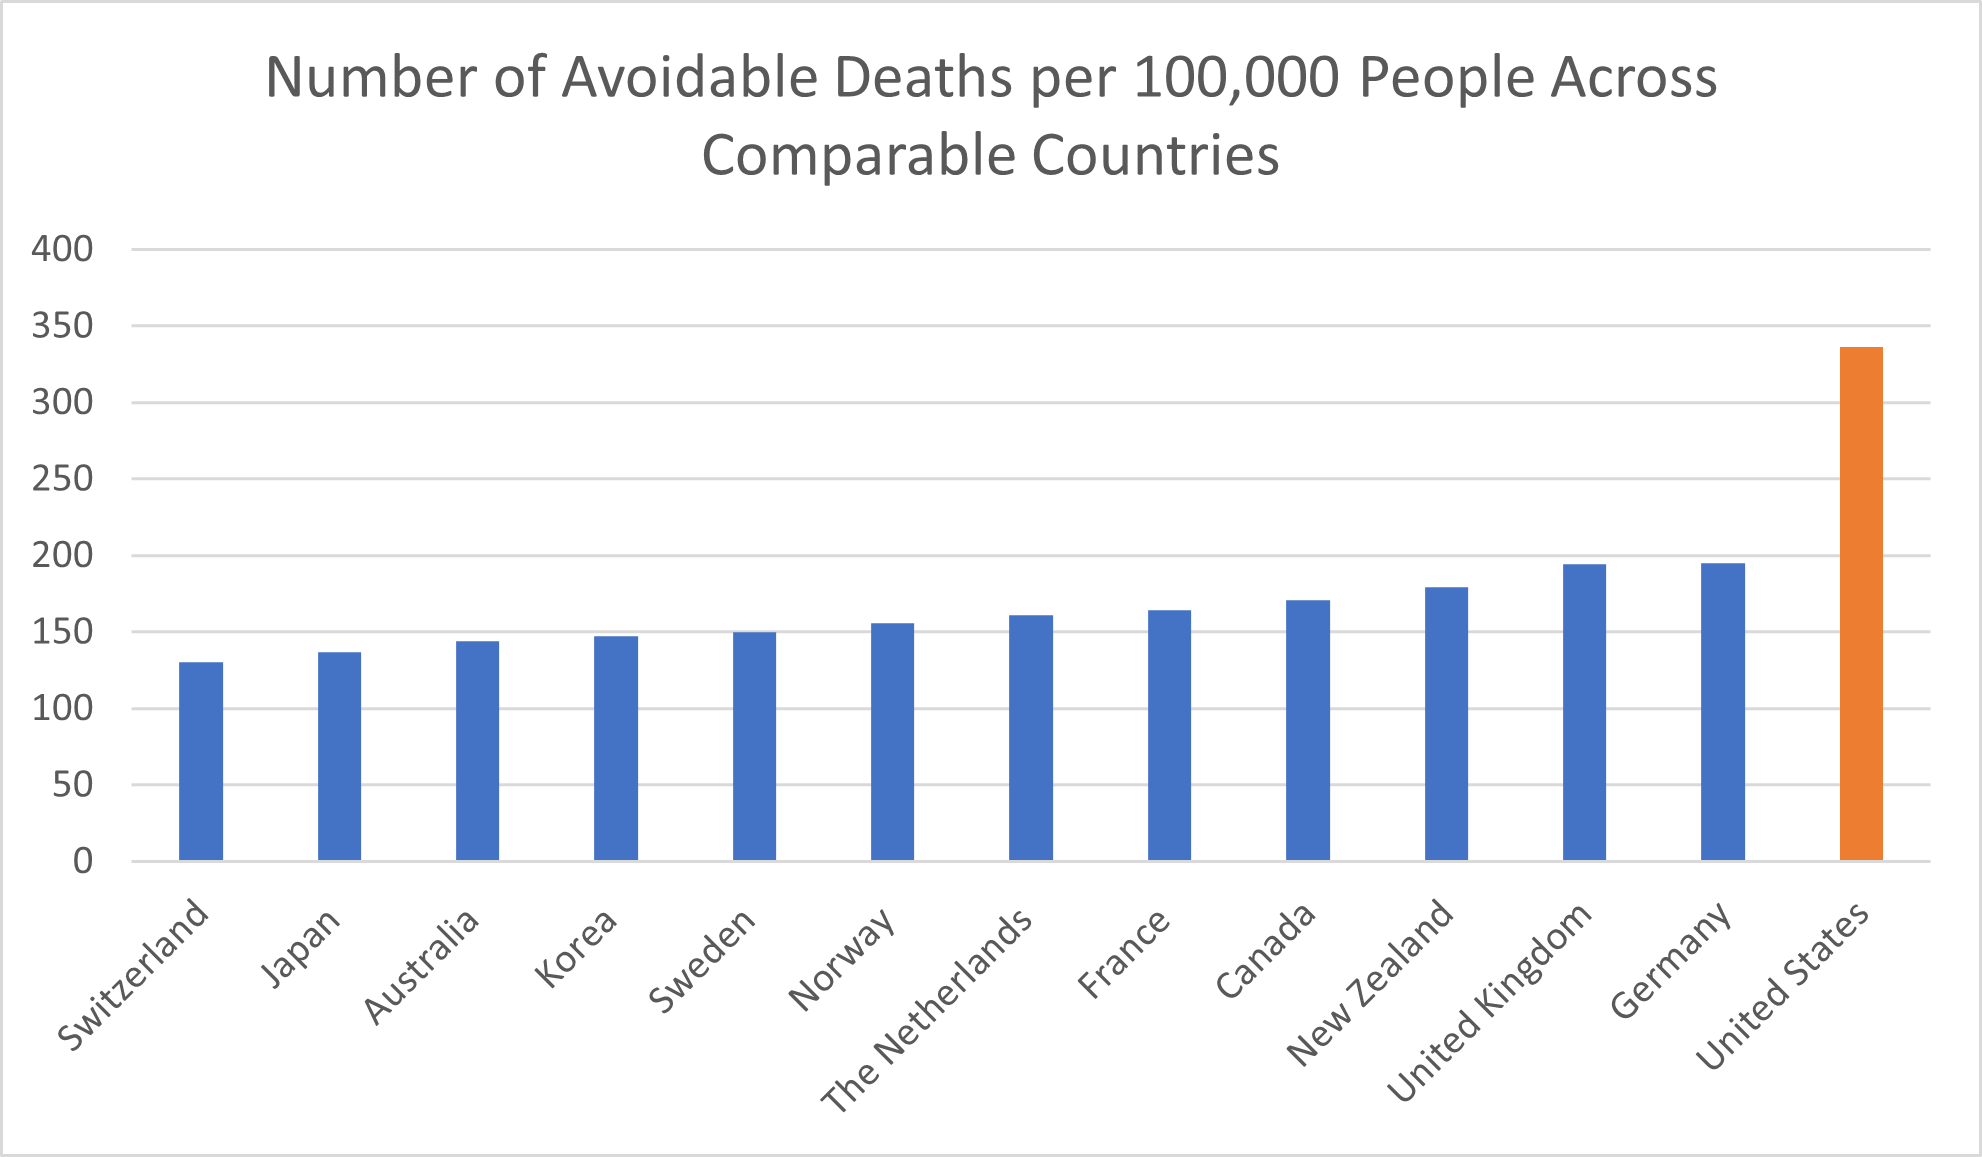 Number of Avoidable Deaths per 100,000 People Across Comparable Countries